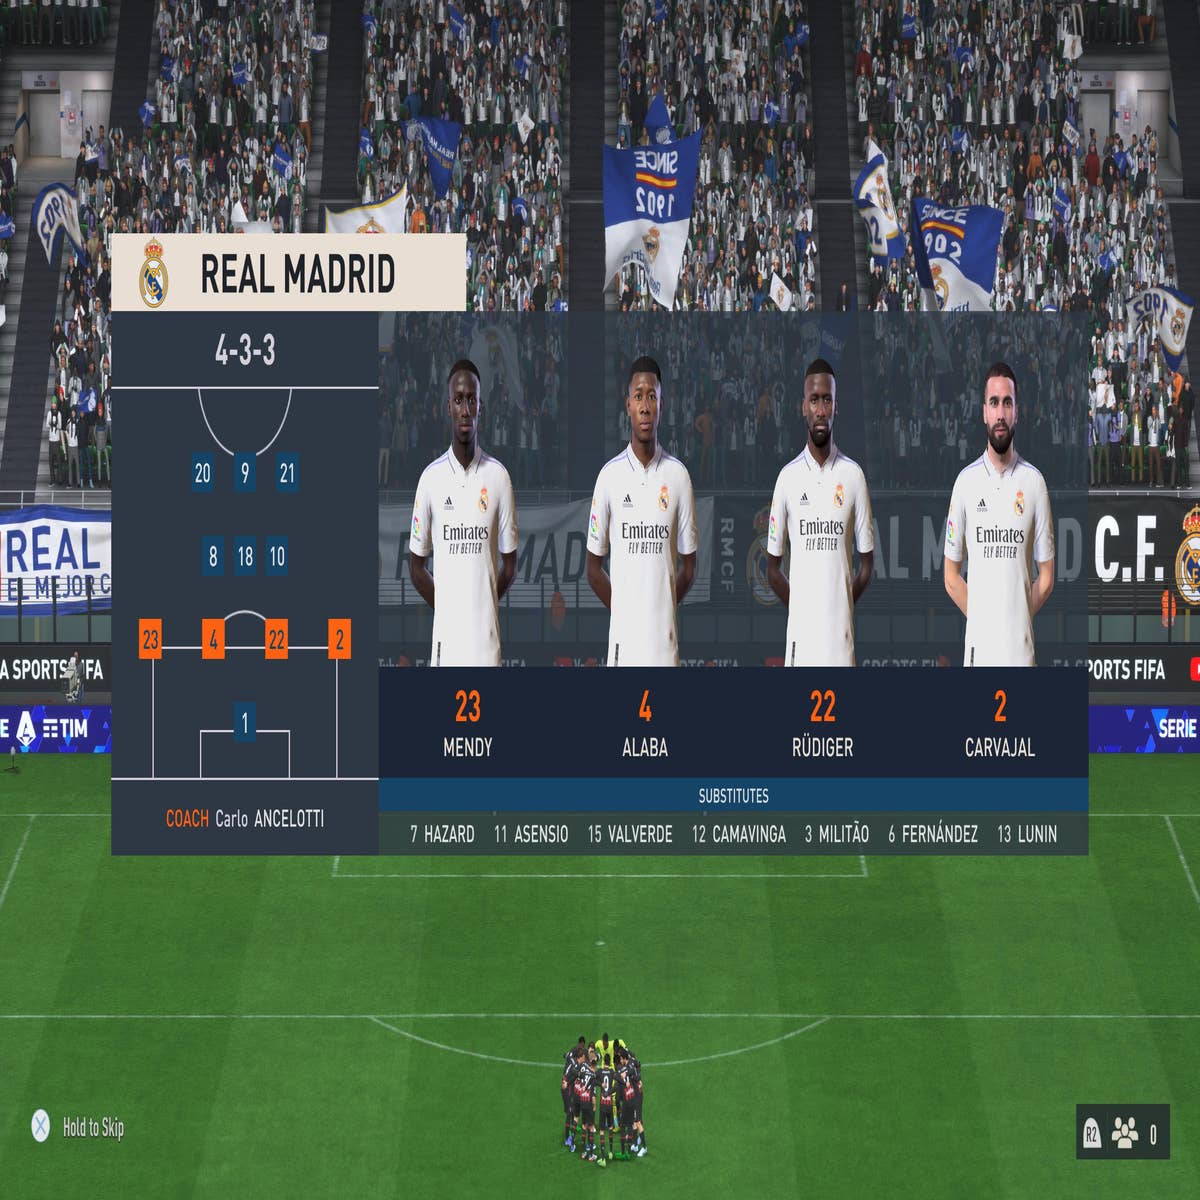 FIFA 18 Real Madrid tips guide to help you dominate